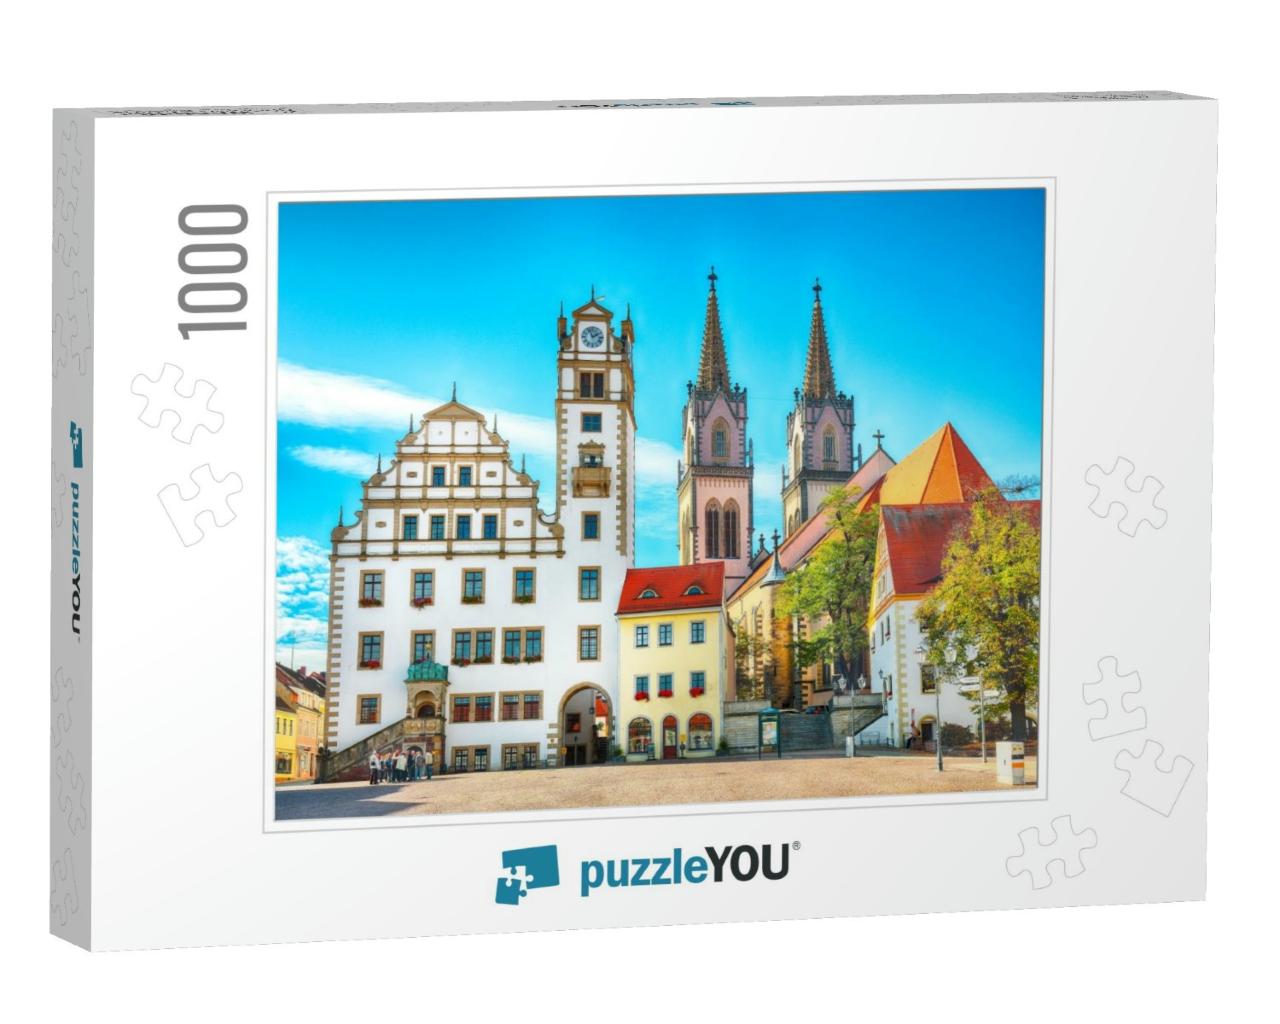 Splendid Autumn Cityscape of Oschatz Central Square with... Jigsaw Puzzle with 1000 pieces